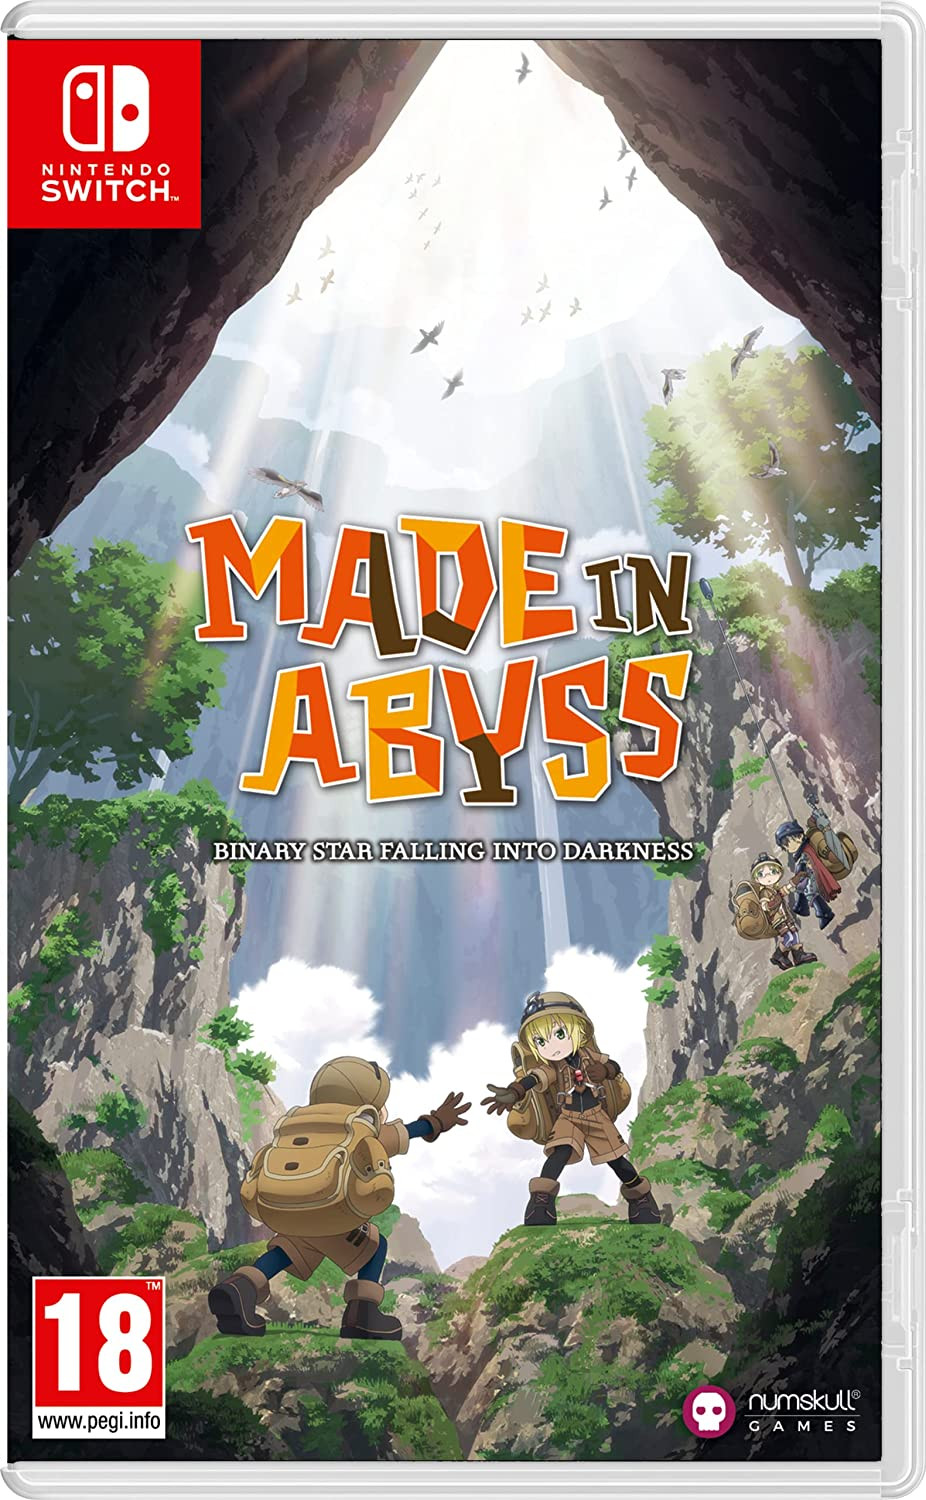 Made in Abyss Binary Star Falling Into Darkness - Nintendo Switch